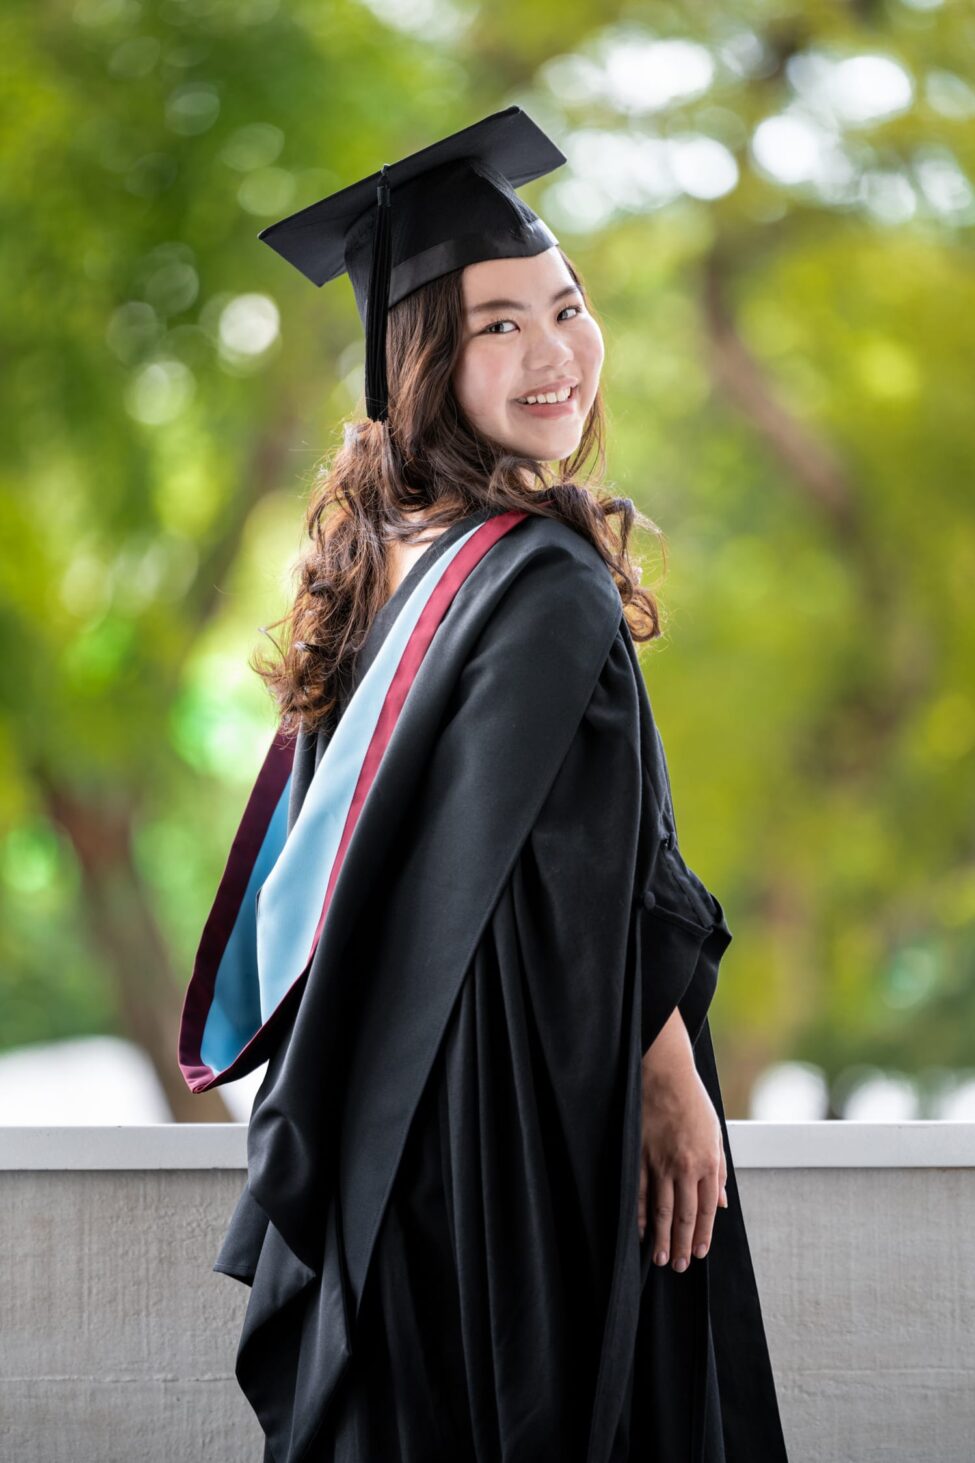 Graduation Photography in Natural Light | White Room Studio